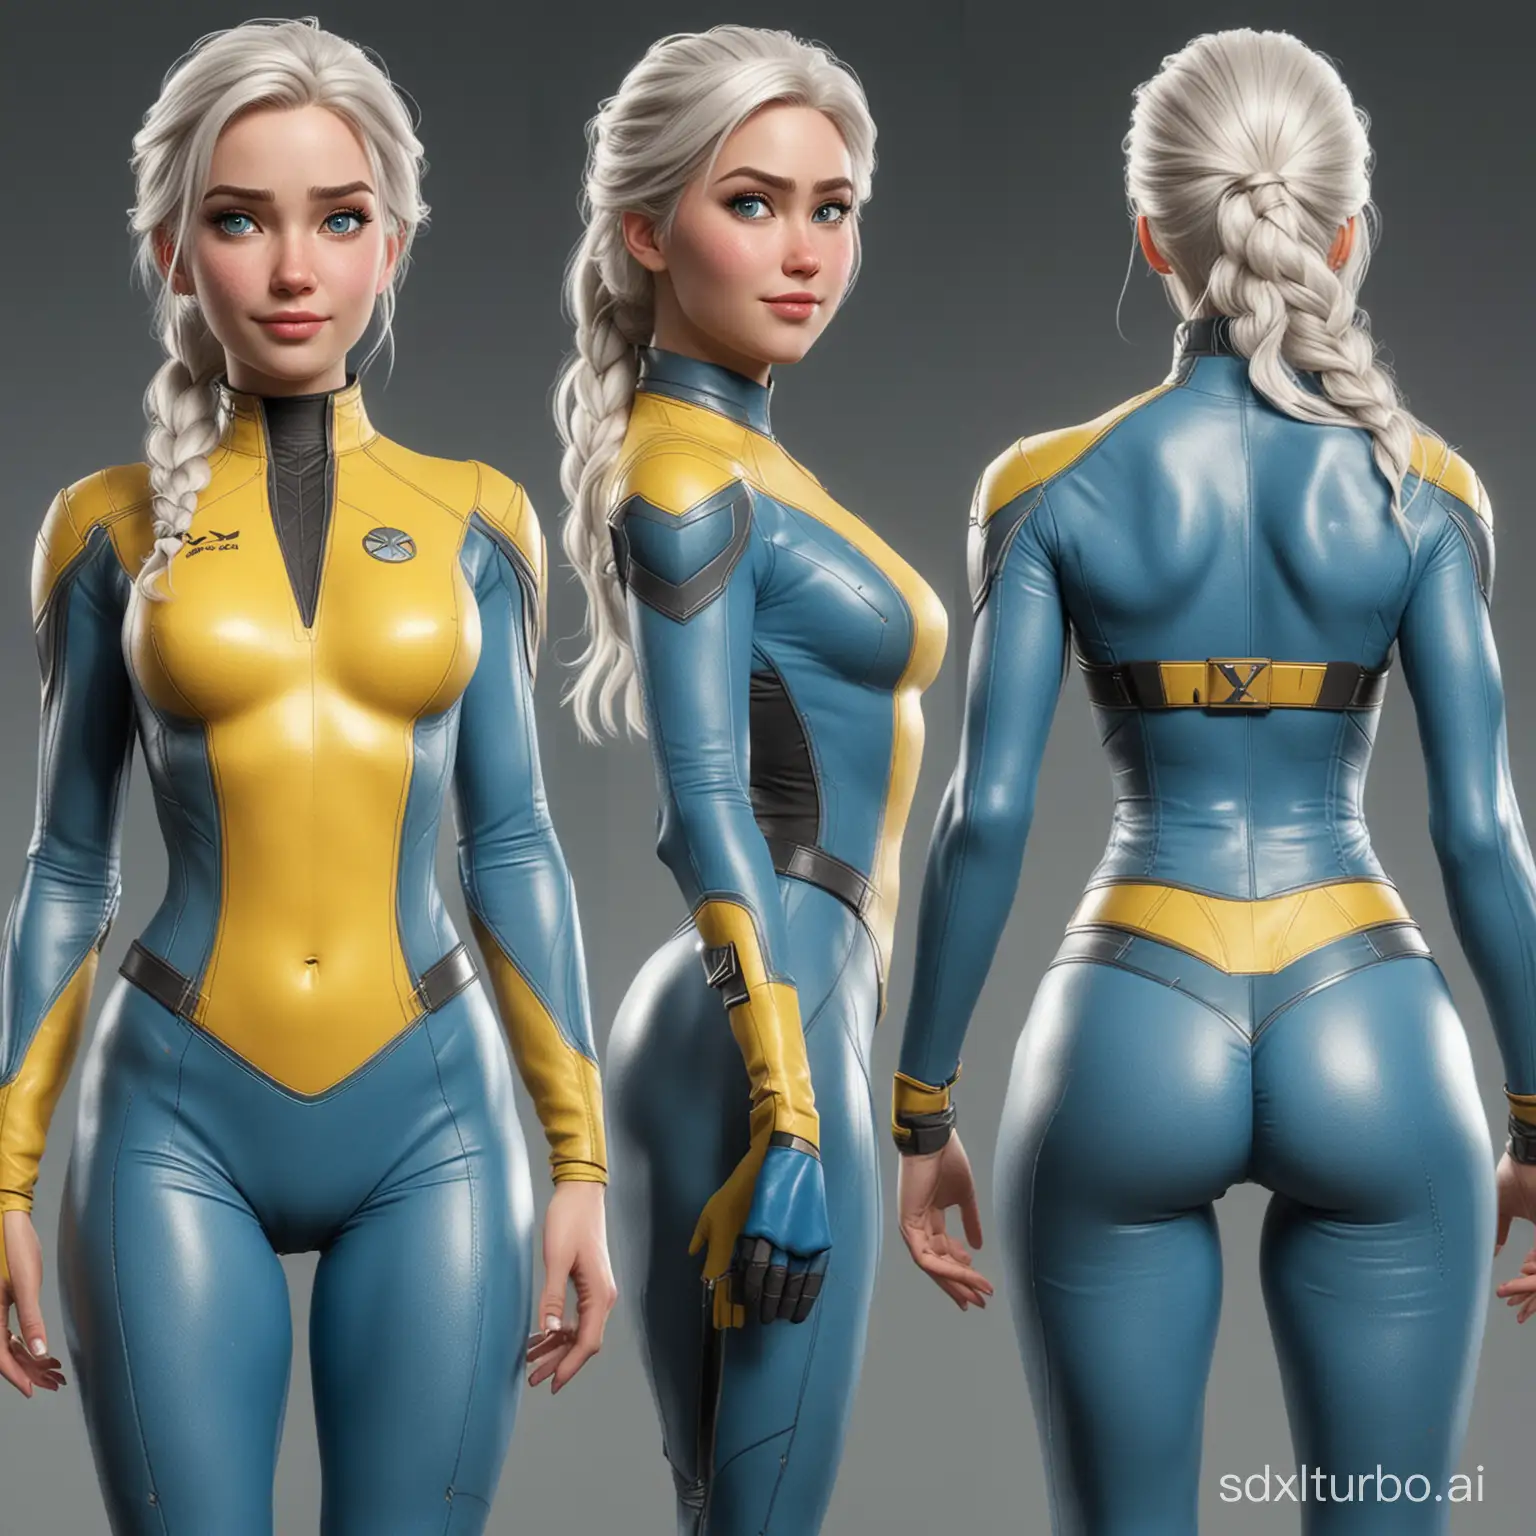 Realistic-Elsa-Full-Body-Front-and-Back-in-XMen-Tight-Uniform